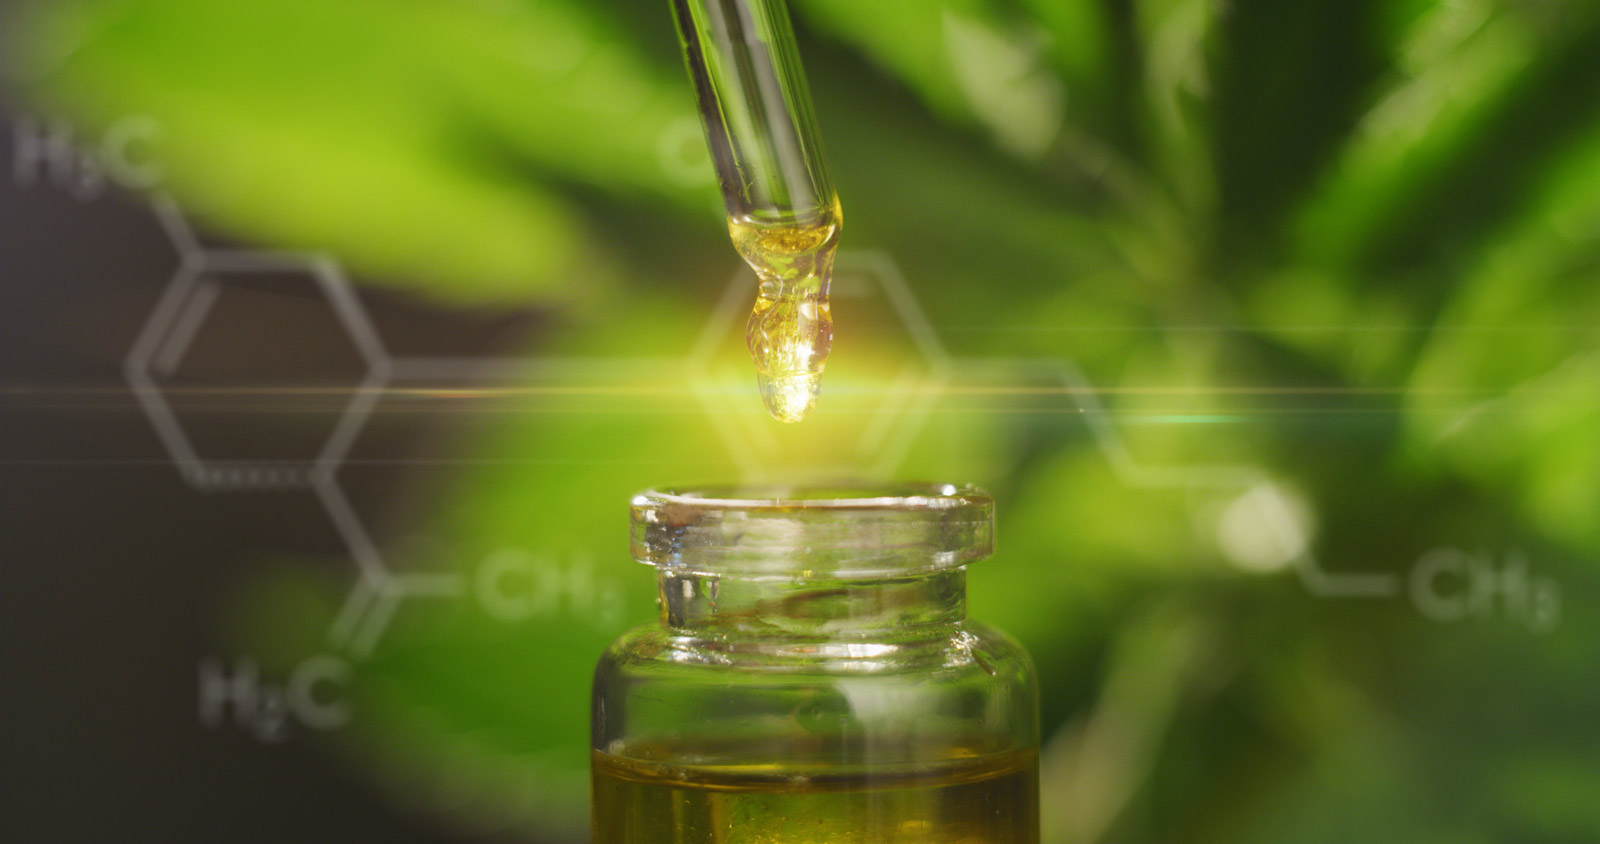 Blog Post: The Endocannabinoid System - What Is It?